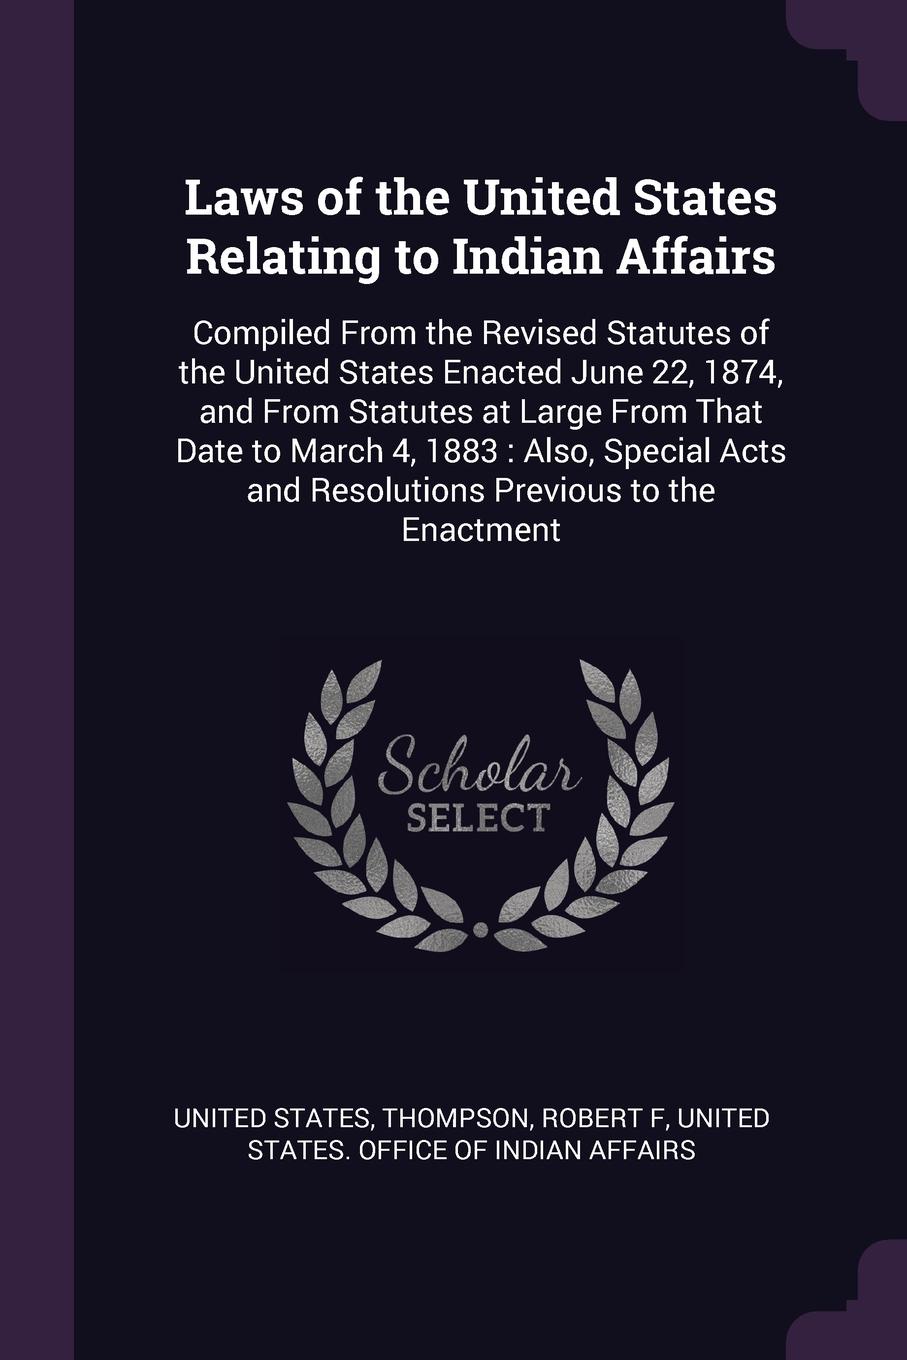 Laws of the United States Relating to Indian Affairs. Compiled From the Revised Statutes of the United States Enacted June 22, 1874, and From Statutes at Large From That Date to March 4, 1883 : Also, Special Acts and Resolutions Previous to the En...